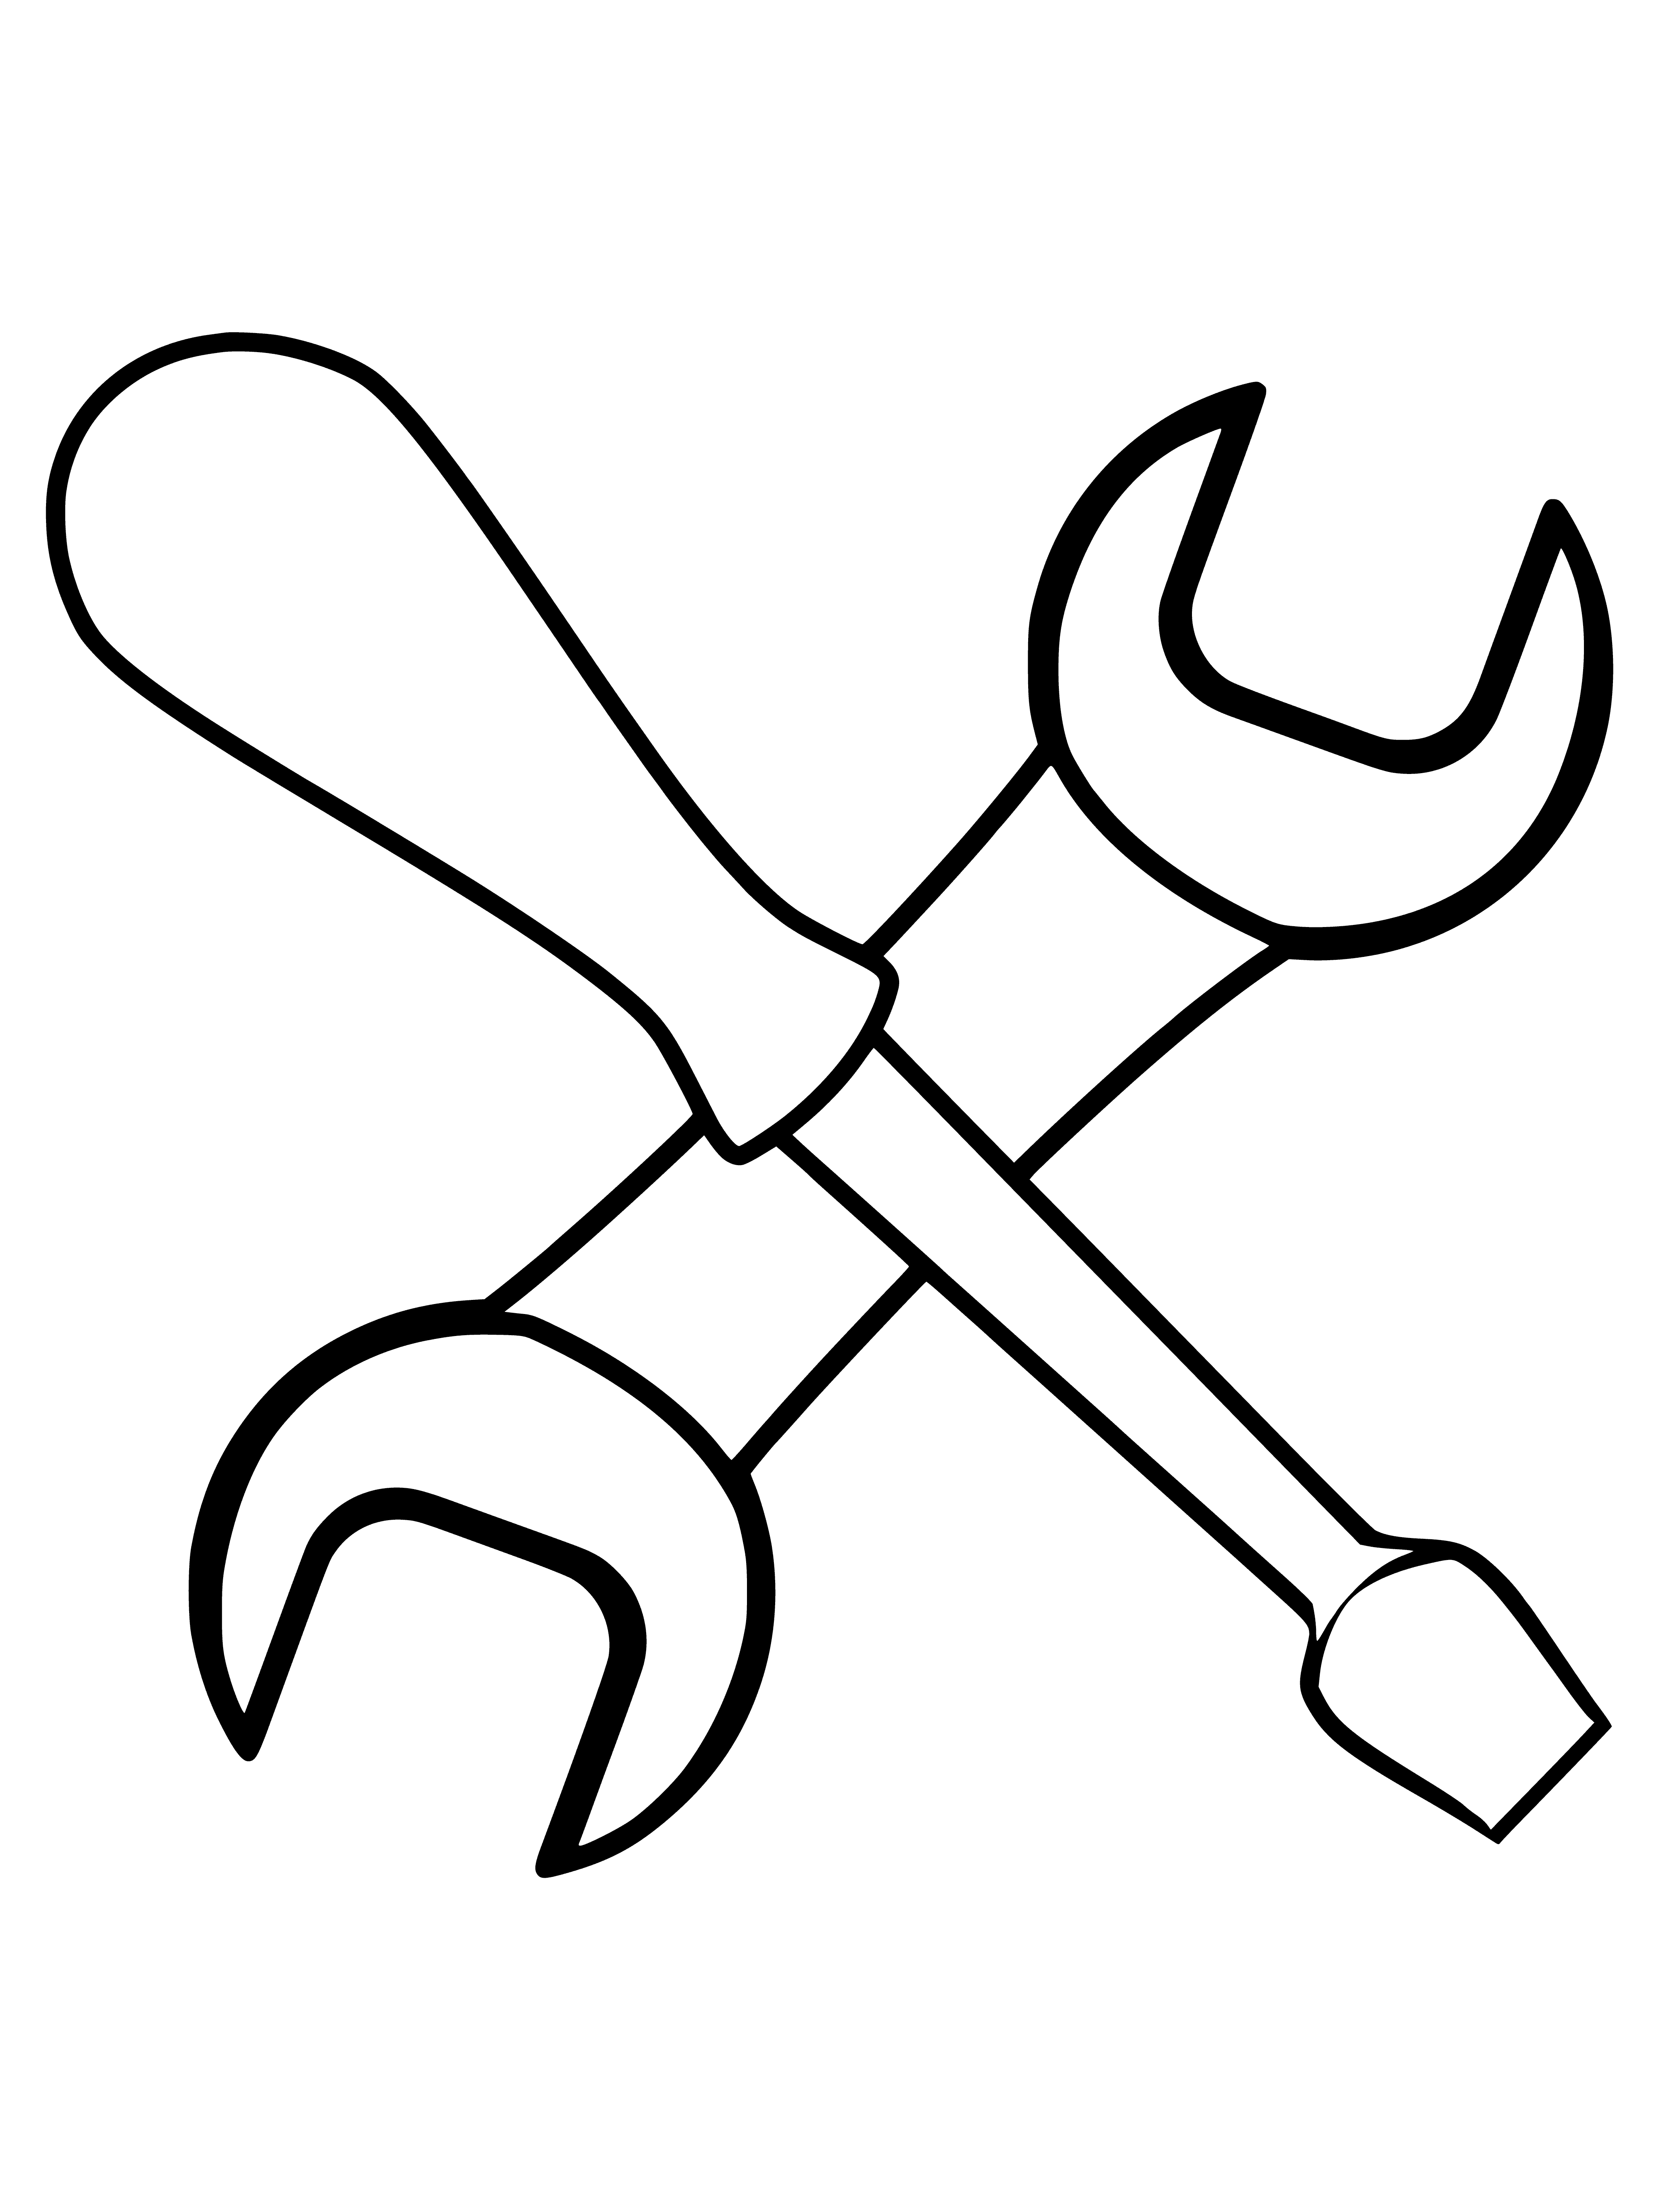 Wrench and screwdriver coloring page